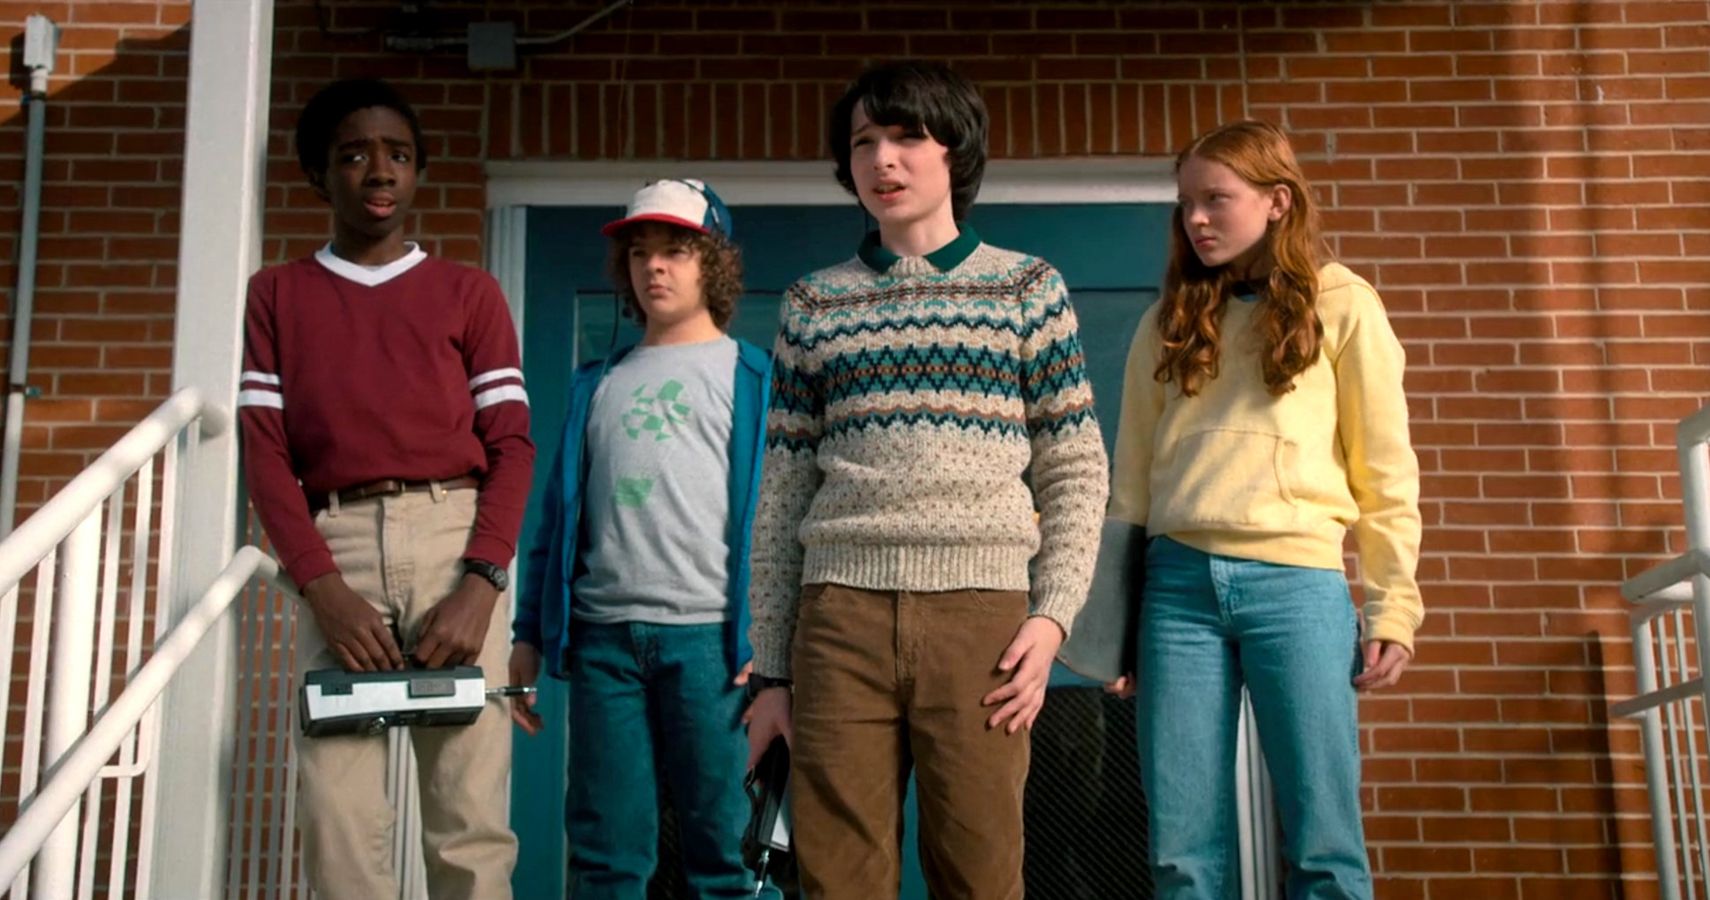 10 Best Episodes Of Stranger Things, Ranked According To IMDb